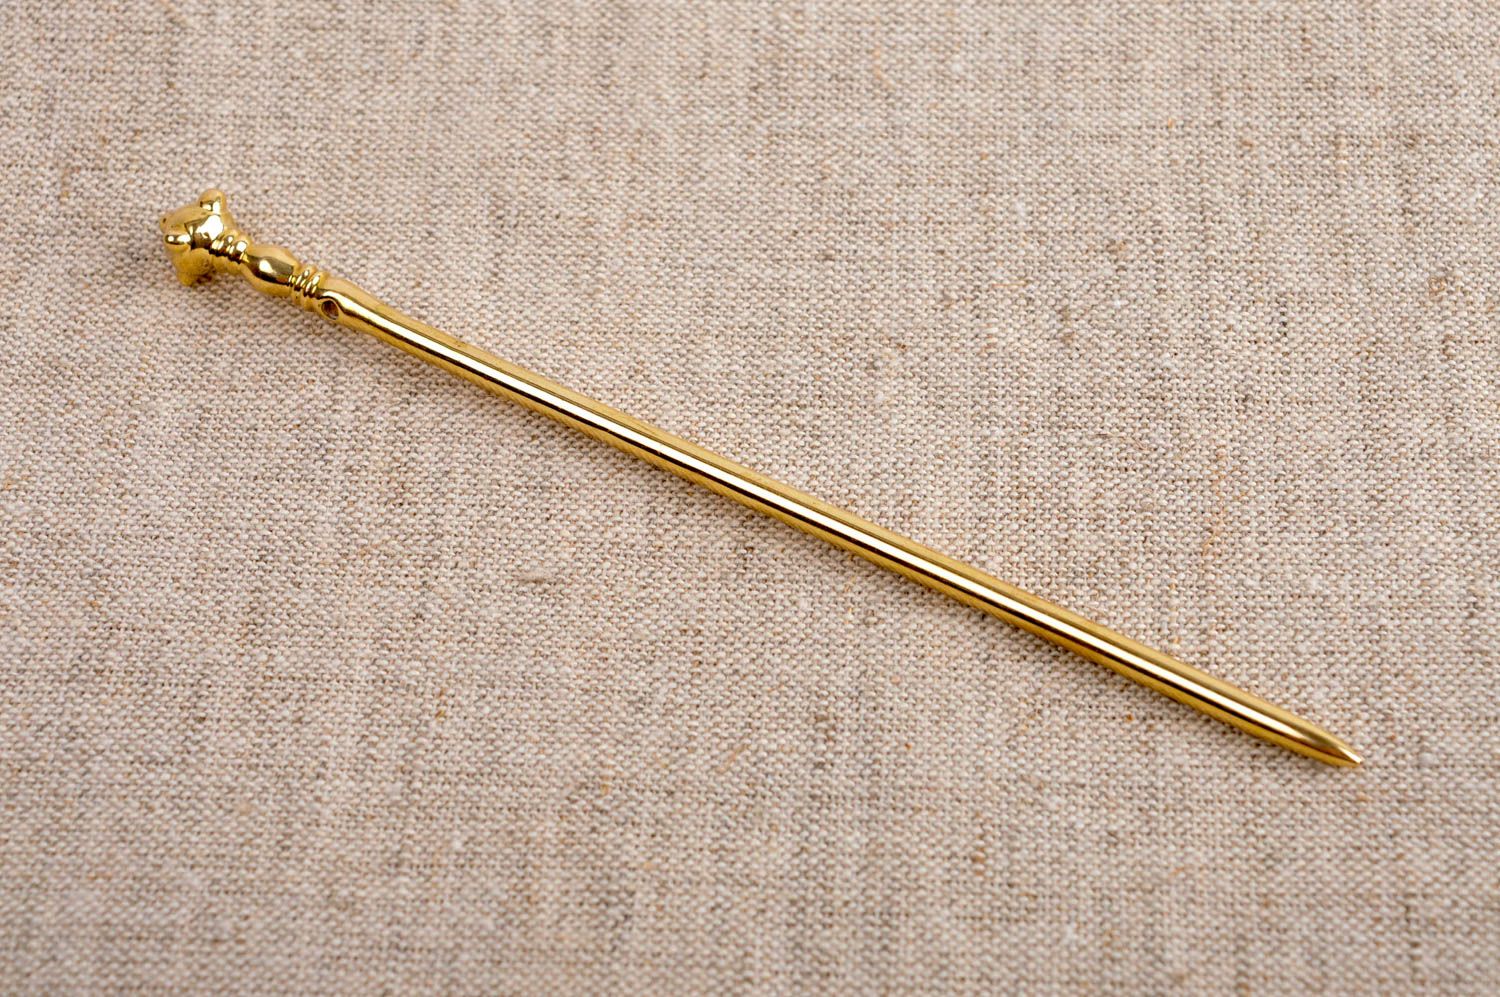 Vintage hair accessories handmade hair pin hair stick metal jewelry cool gifts photo 1